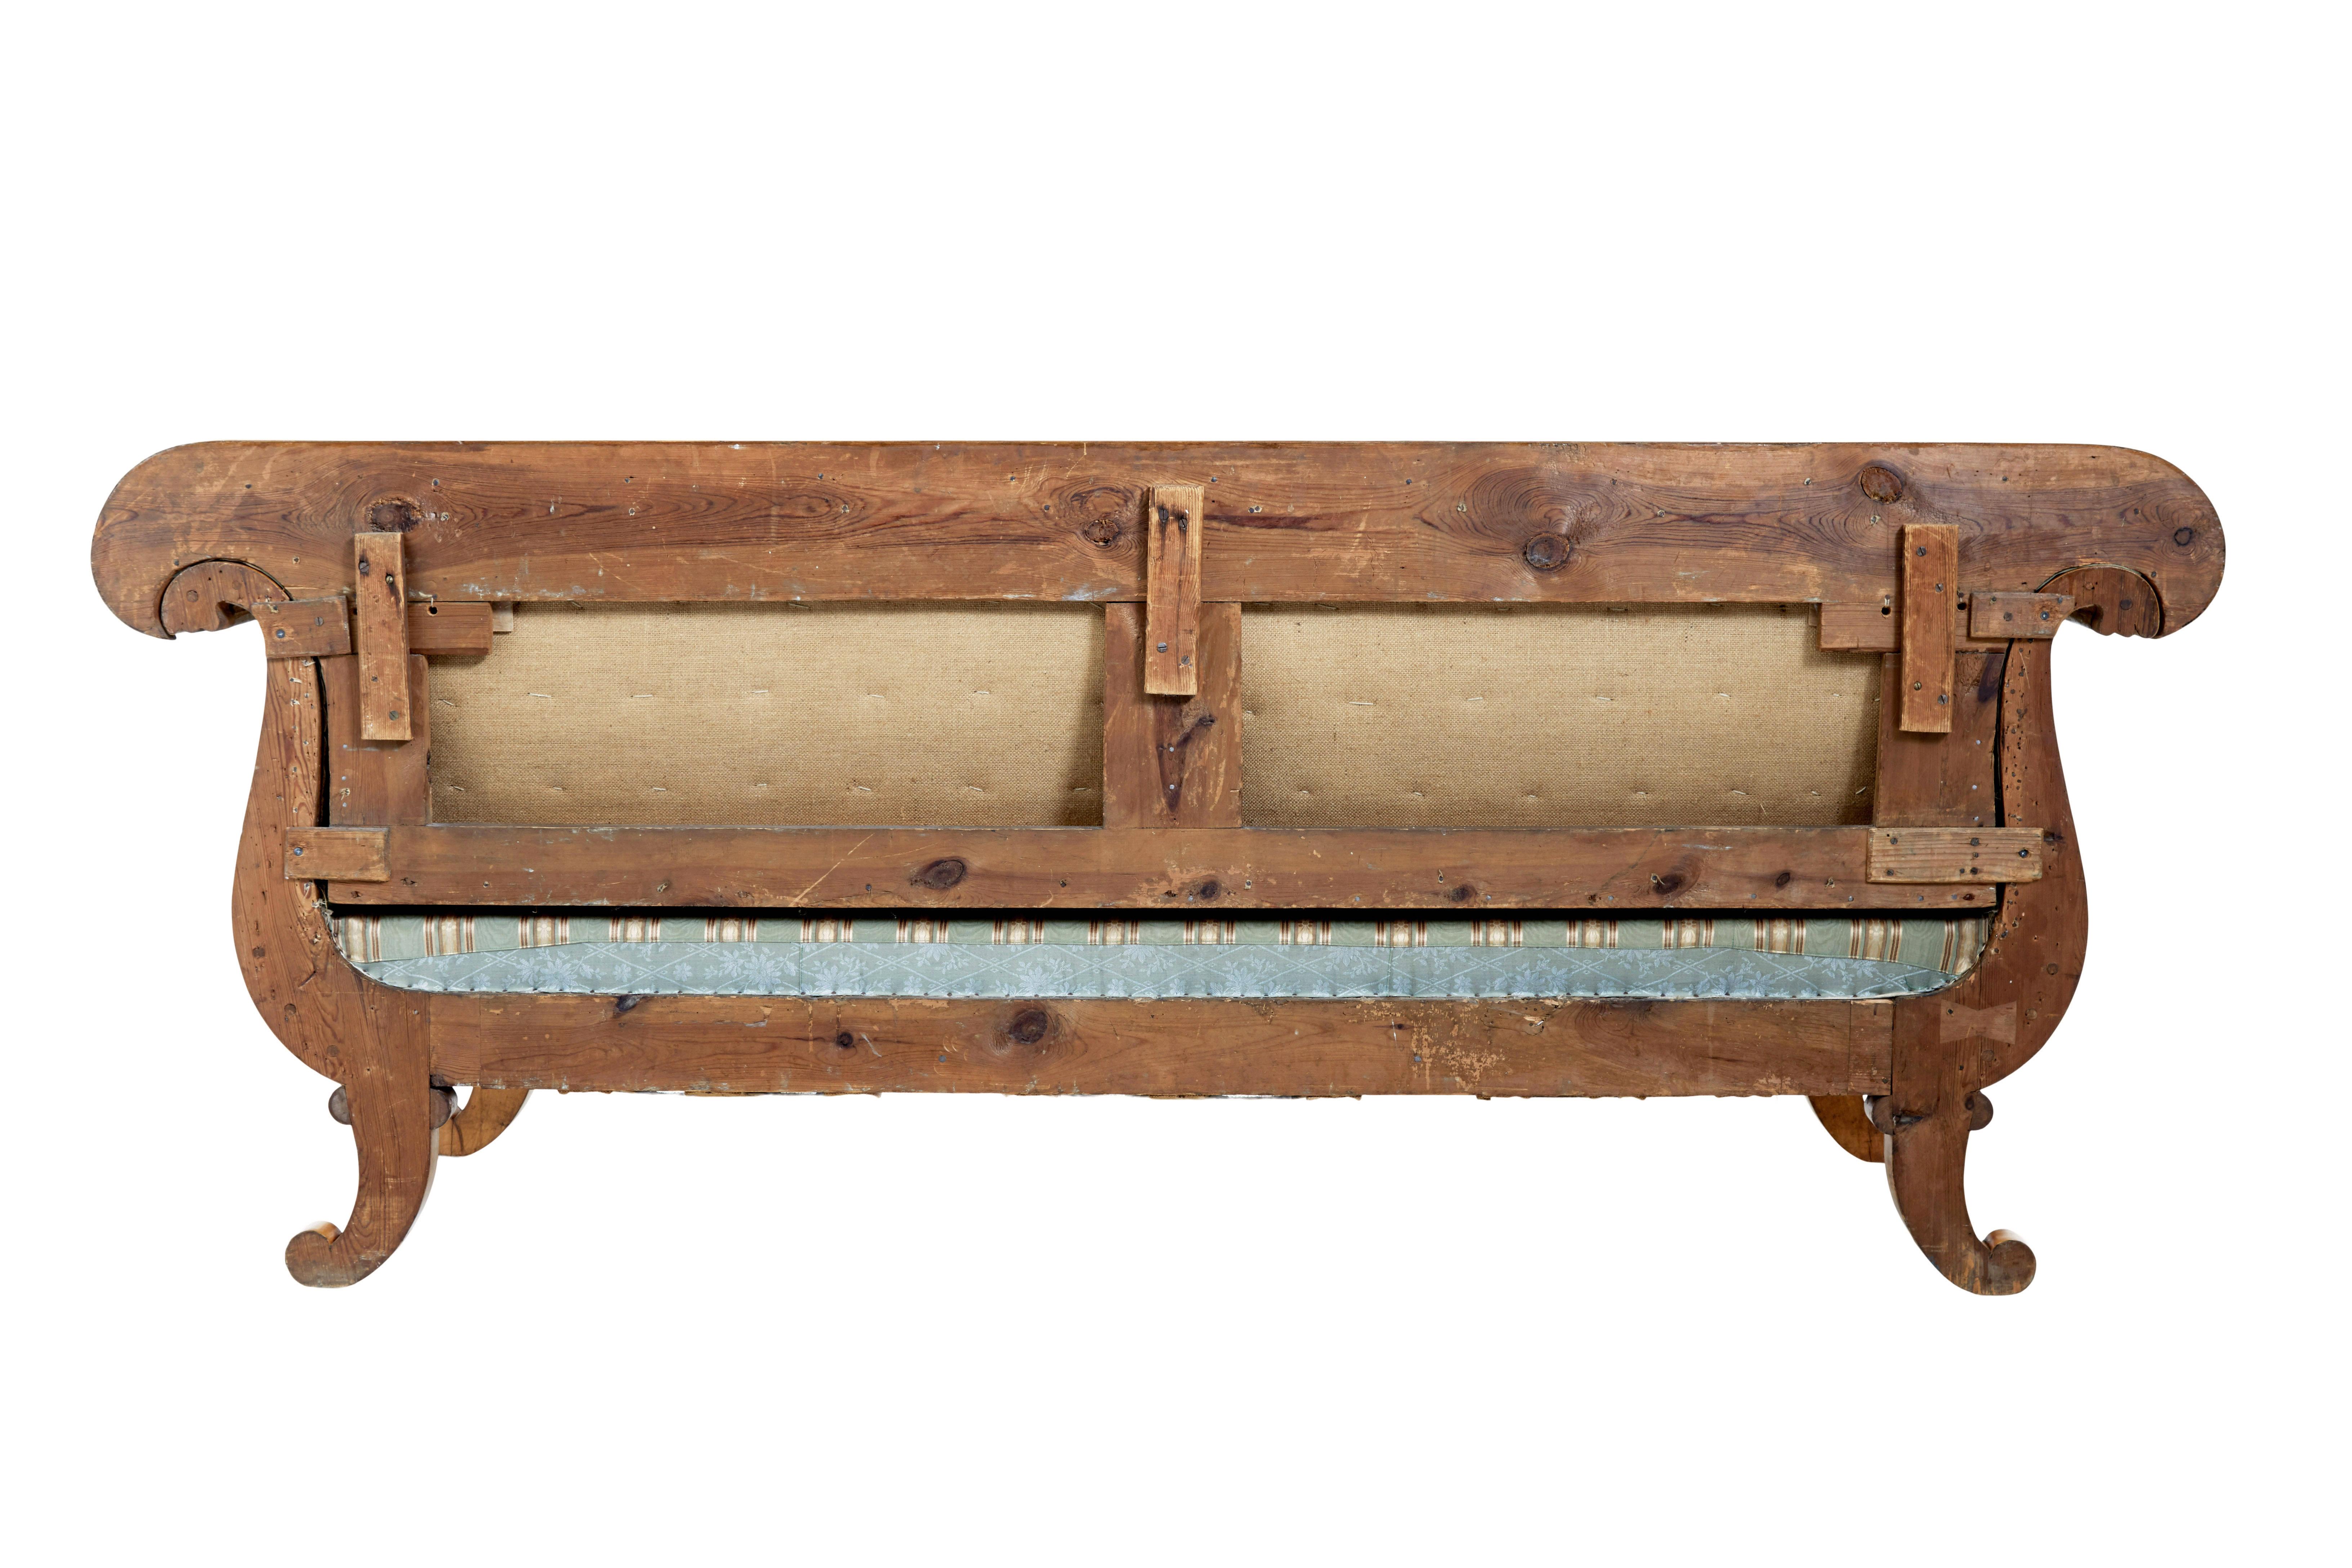 Carved 19th century Swedish carved birch sofa For Sale